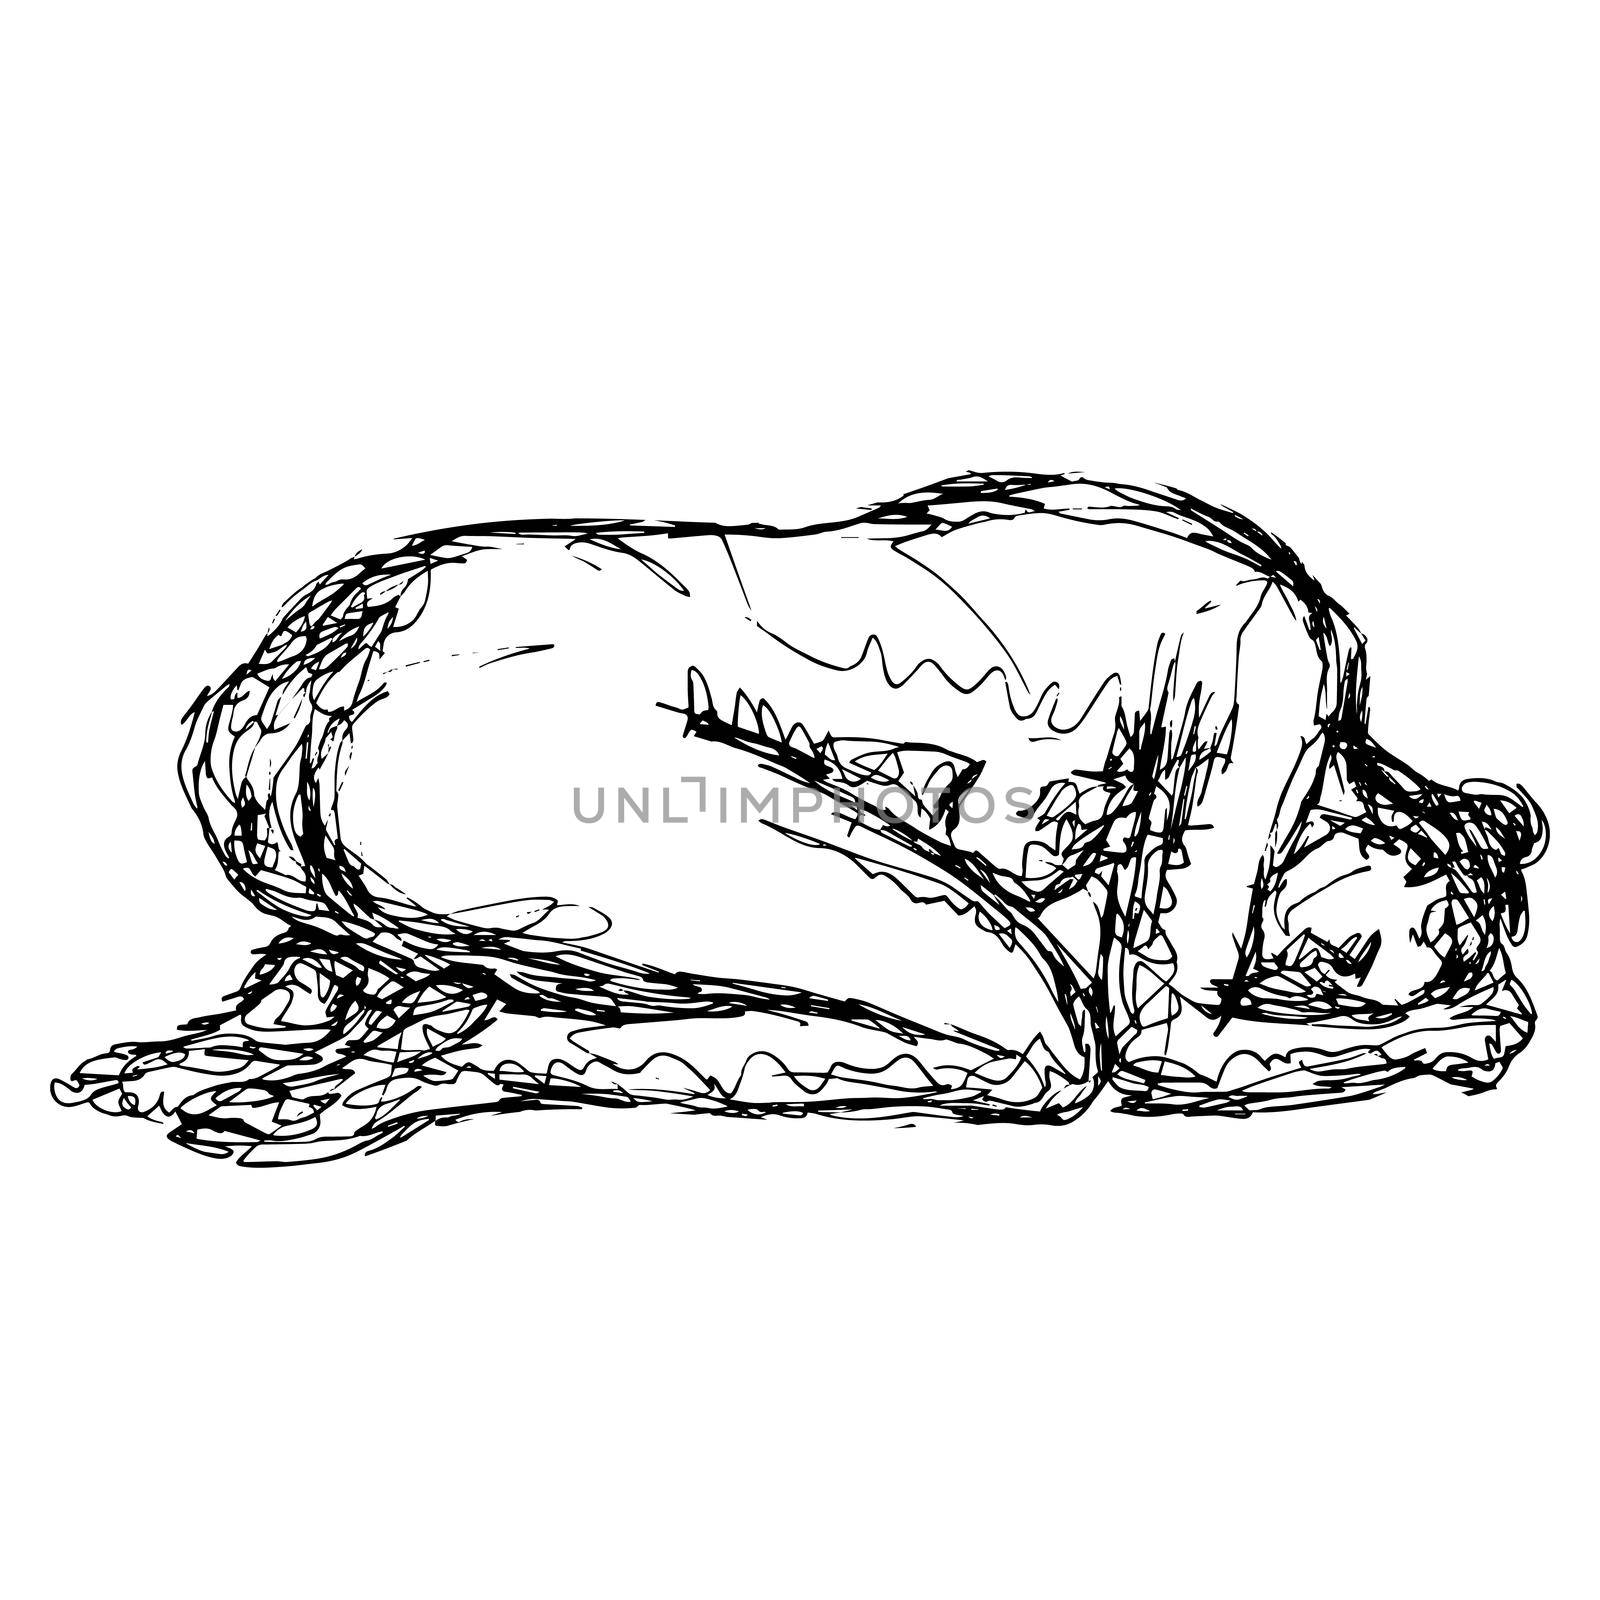 Nude Female Human Figure in Prone Position Doodle Art Continuous Line Drawing  by patrimonio